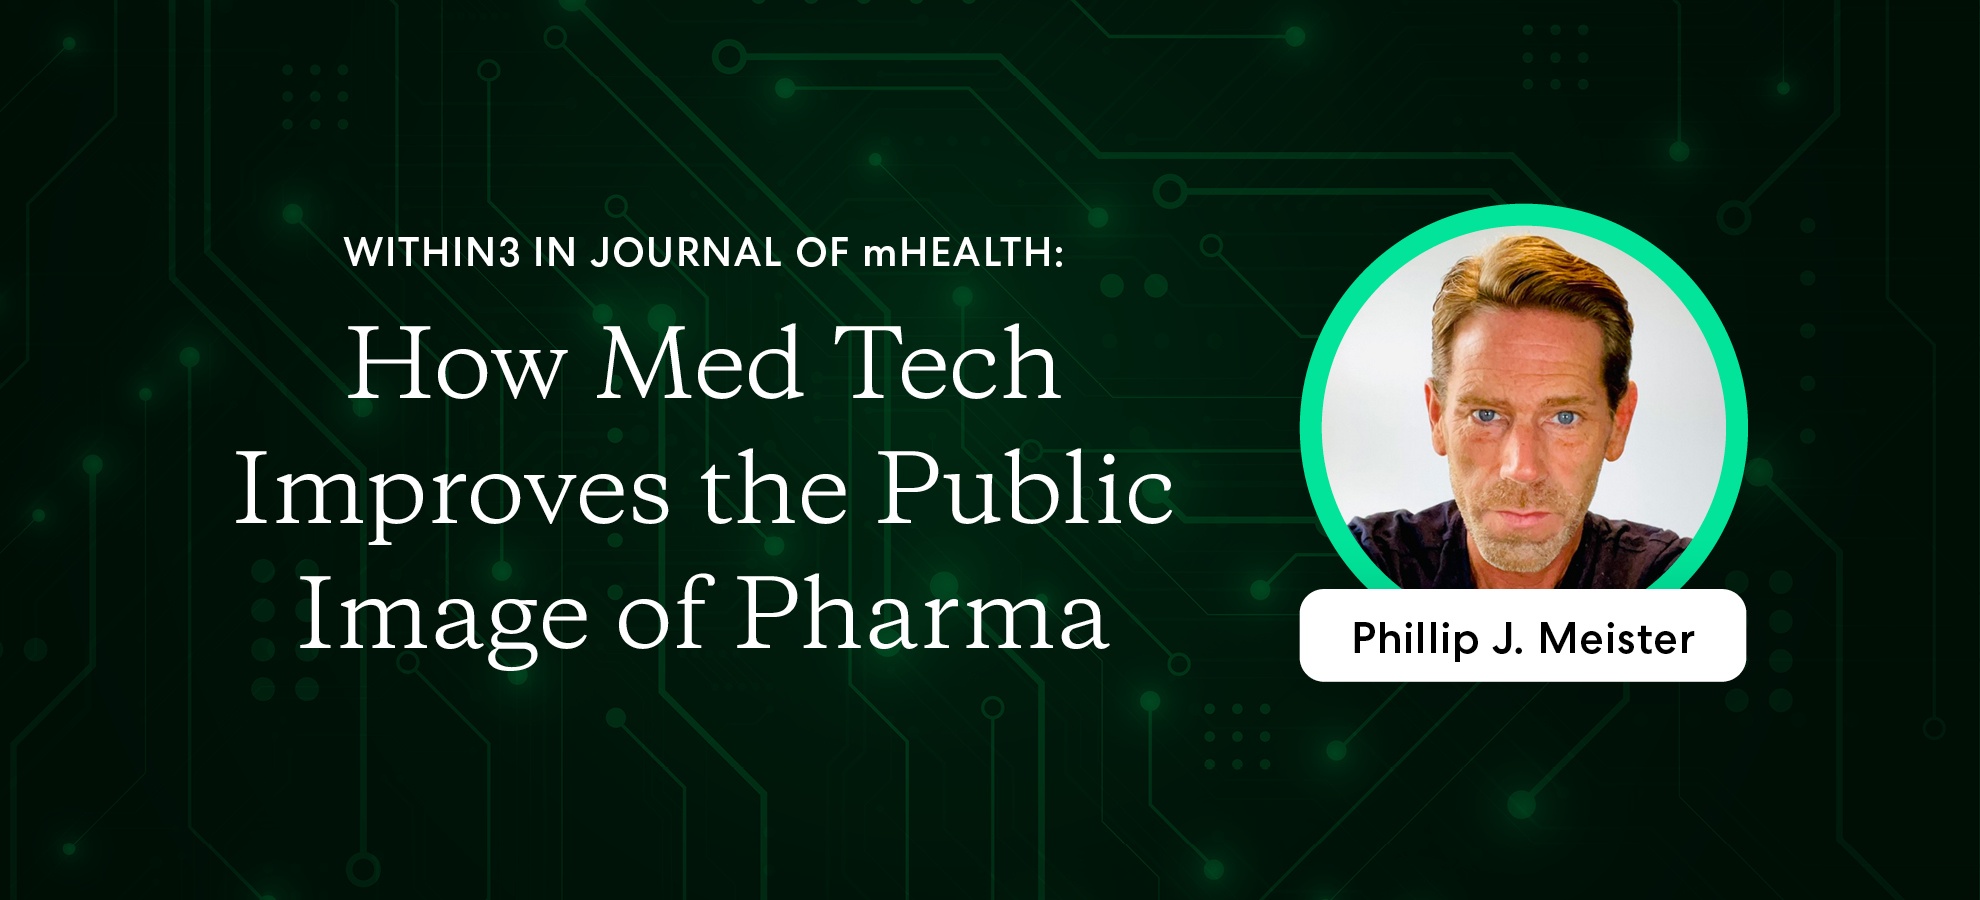 Within3 in Journal of mHealth: How Med Tech Improves the Public Image of Pharma